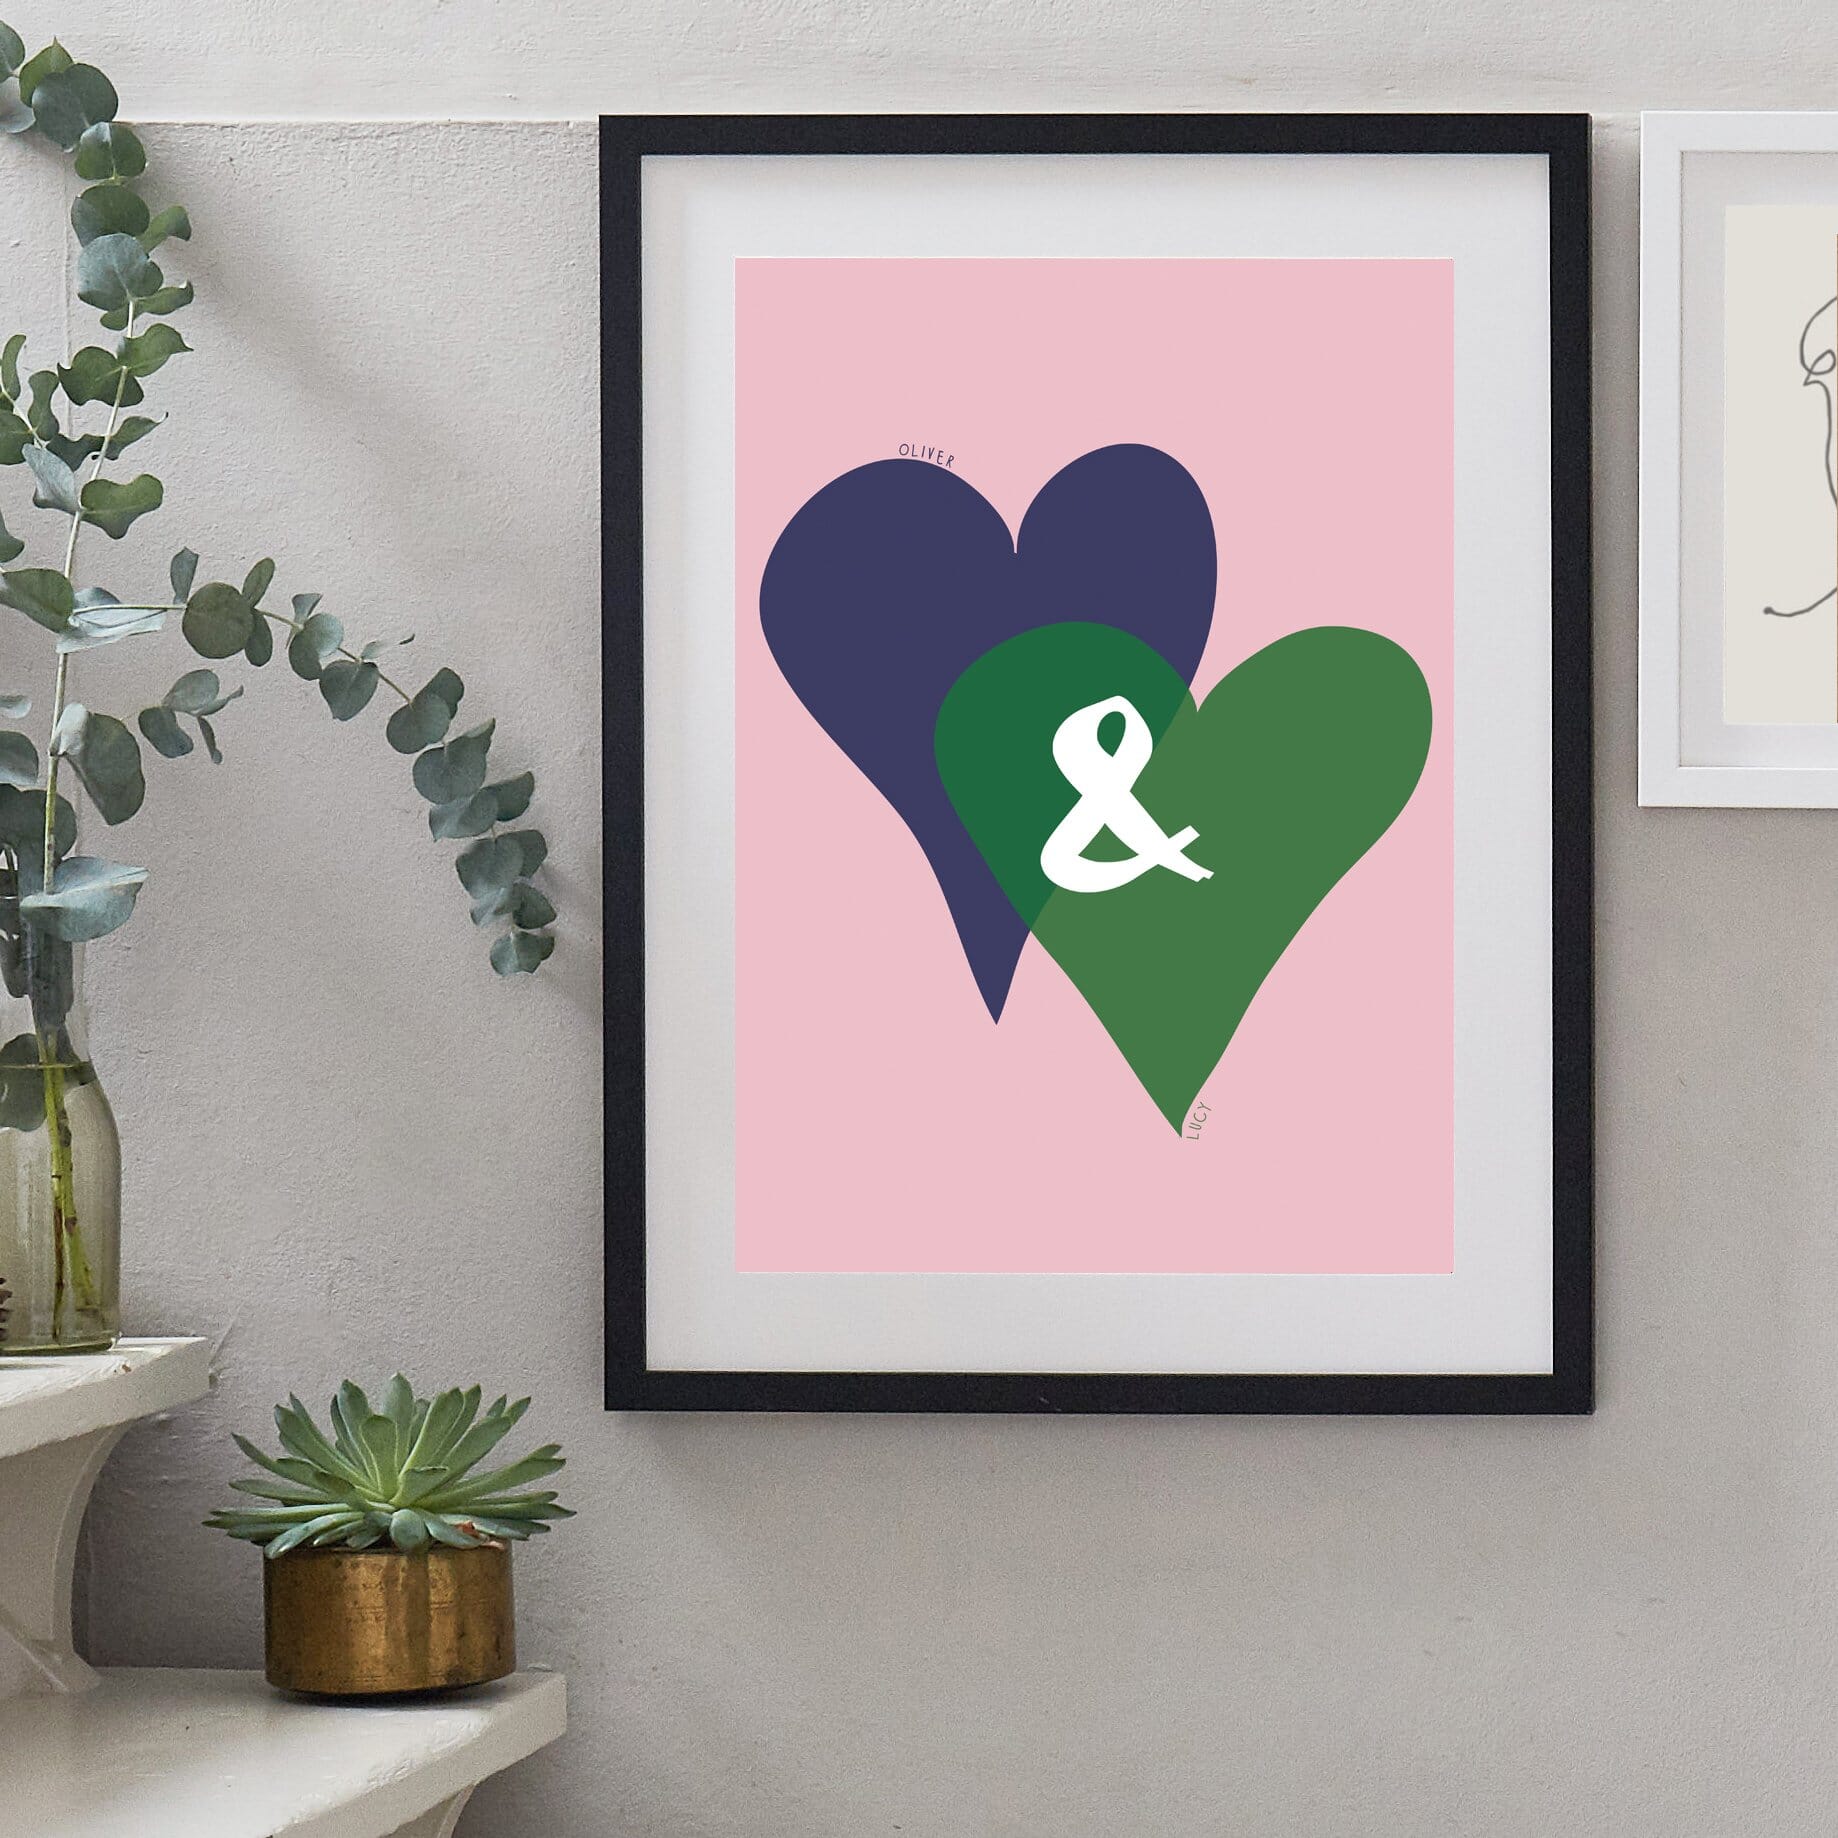 Personalised Entwined Hearts Ampersand Print-Print-Betsy Benn